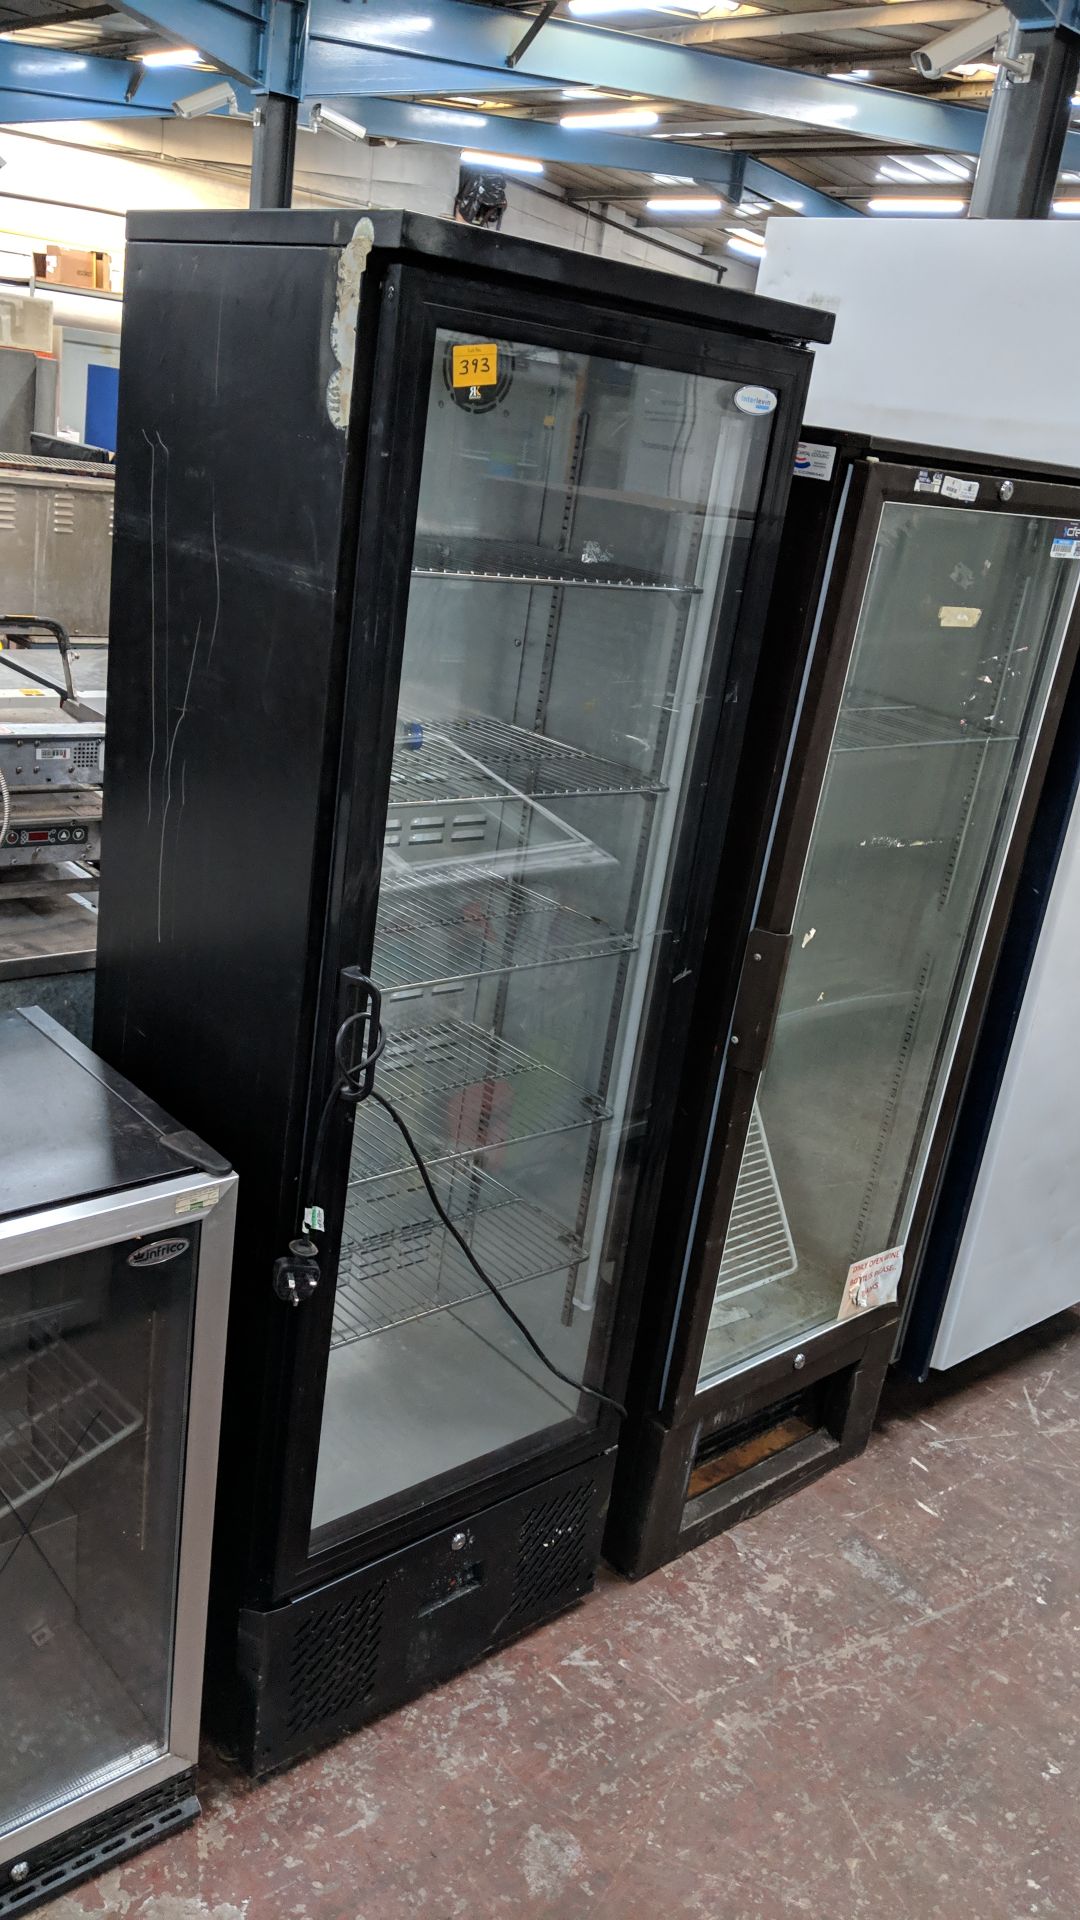 2 off tall clear door display fridges IMPORTANT: Please remember goods successfully bid upon must be